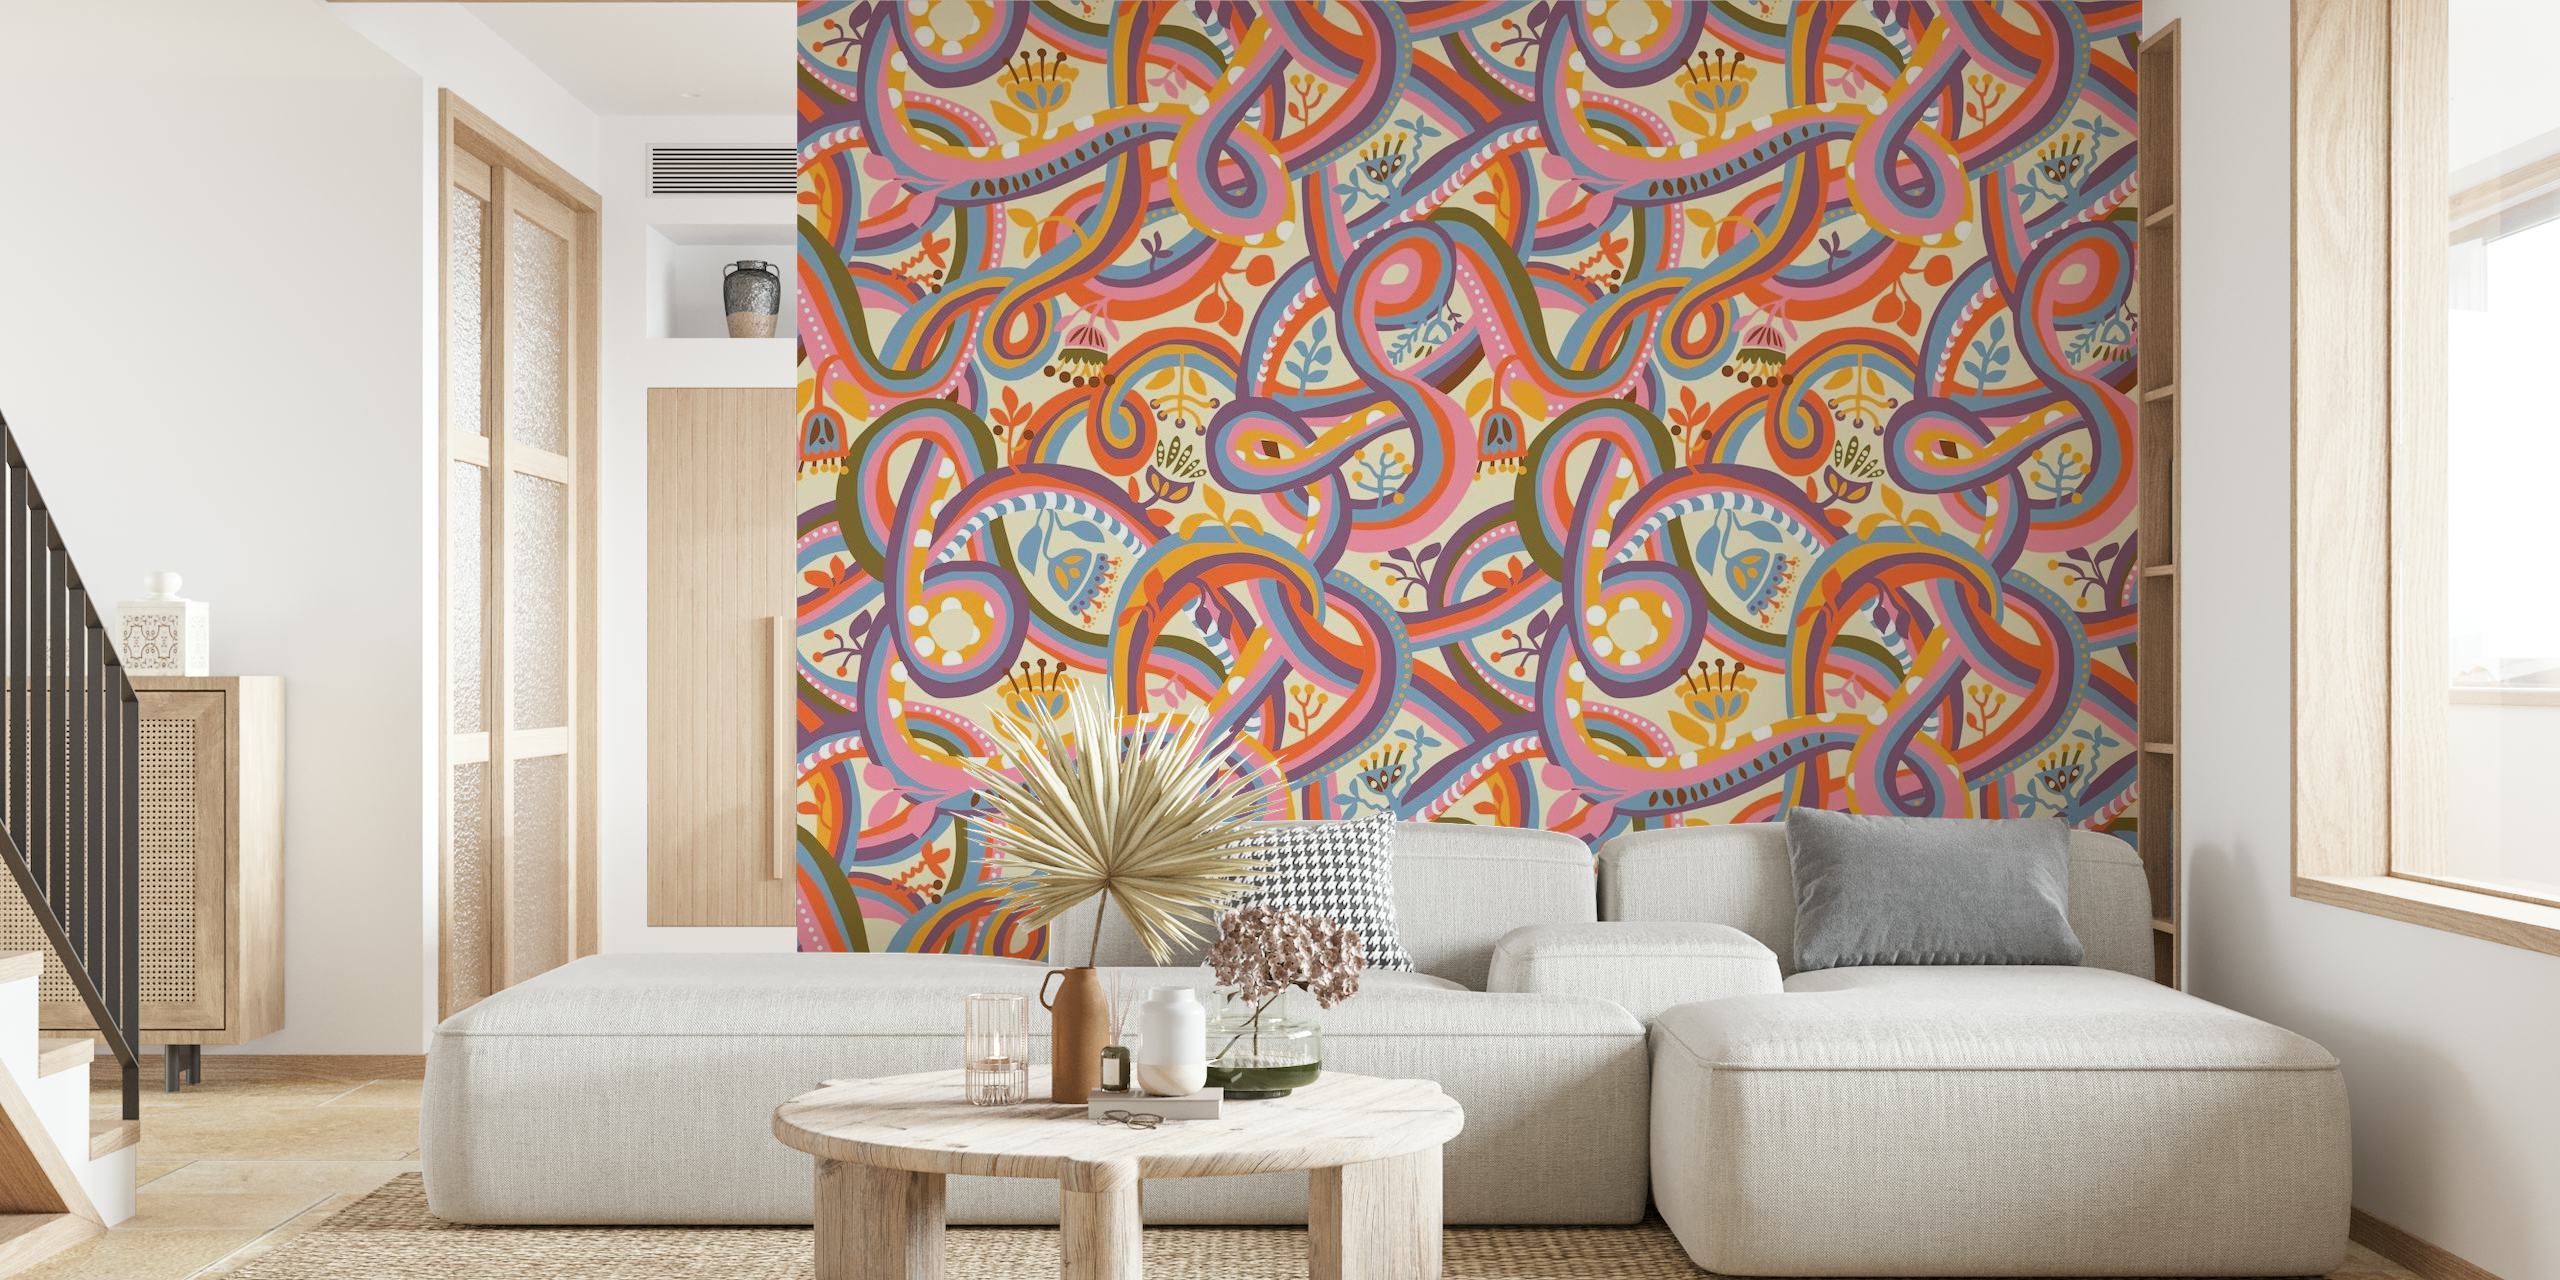 Psychedelic creeper pattern wall mural with intertwining vines in warm hues